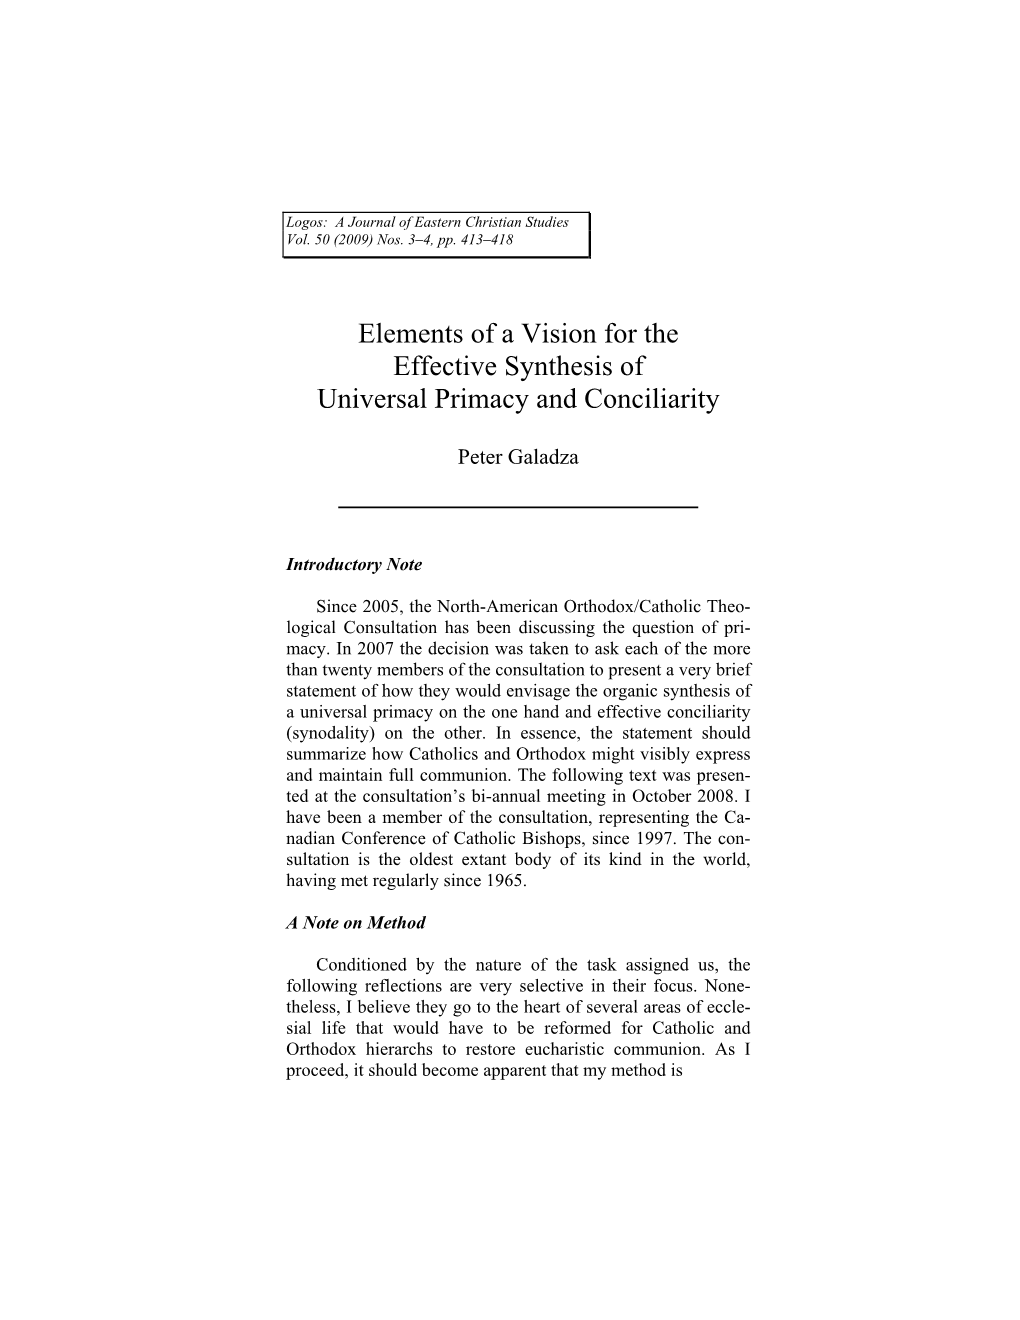 Elements of a Vision for the Effective Synthesis of Universal Primacy and Conciliarity